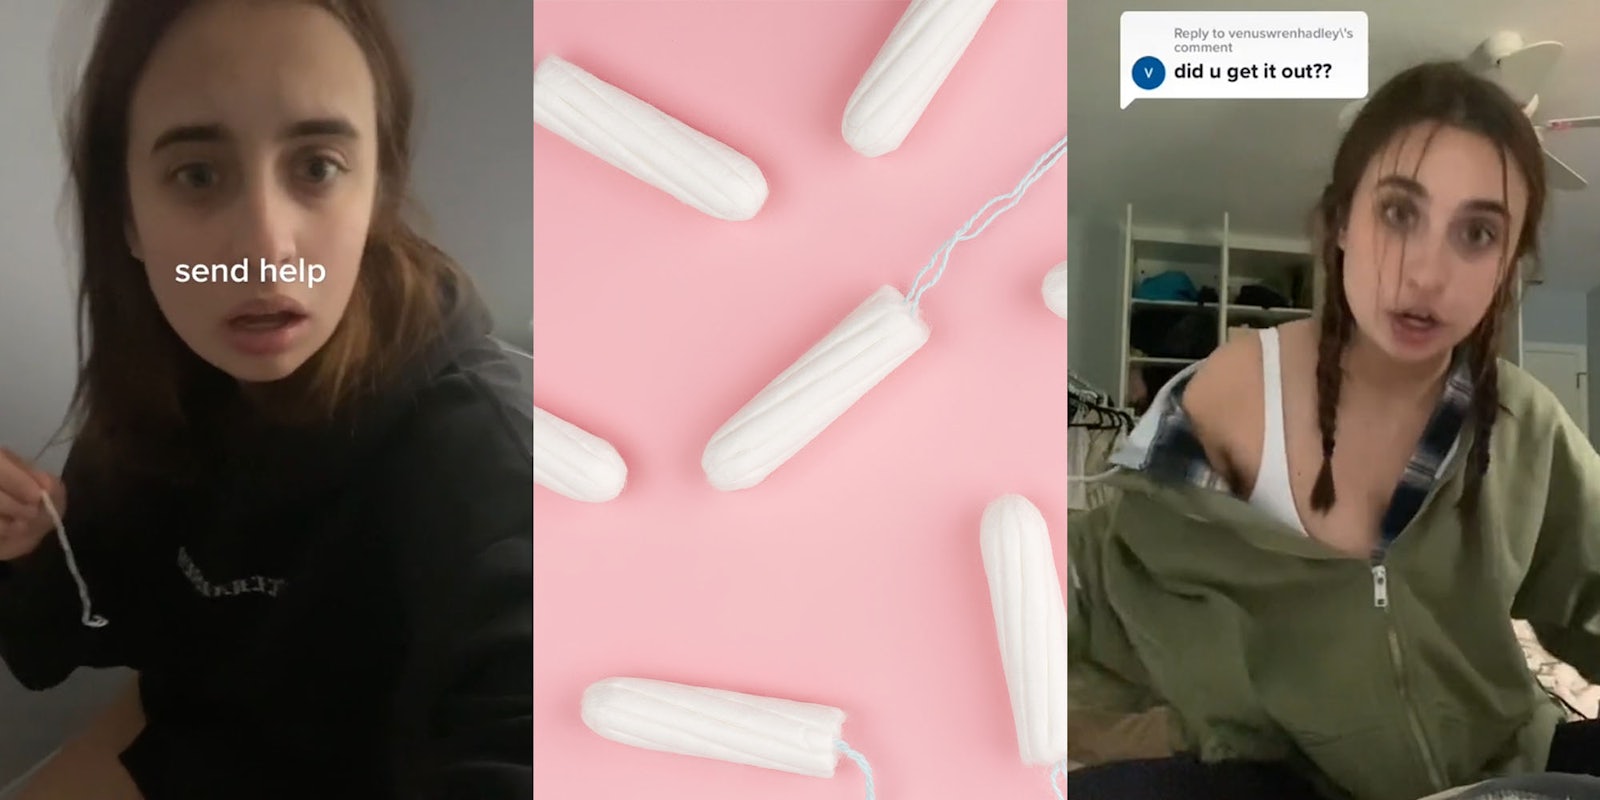 Woman on toilet holding tampon string worried caption 'send help' (l) tampons on pink background (c) Woman in hoodie on bed talking caption 'did you get it out??' (r)